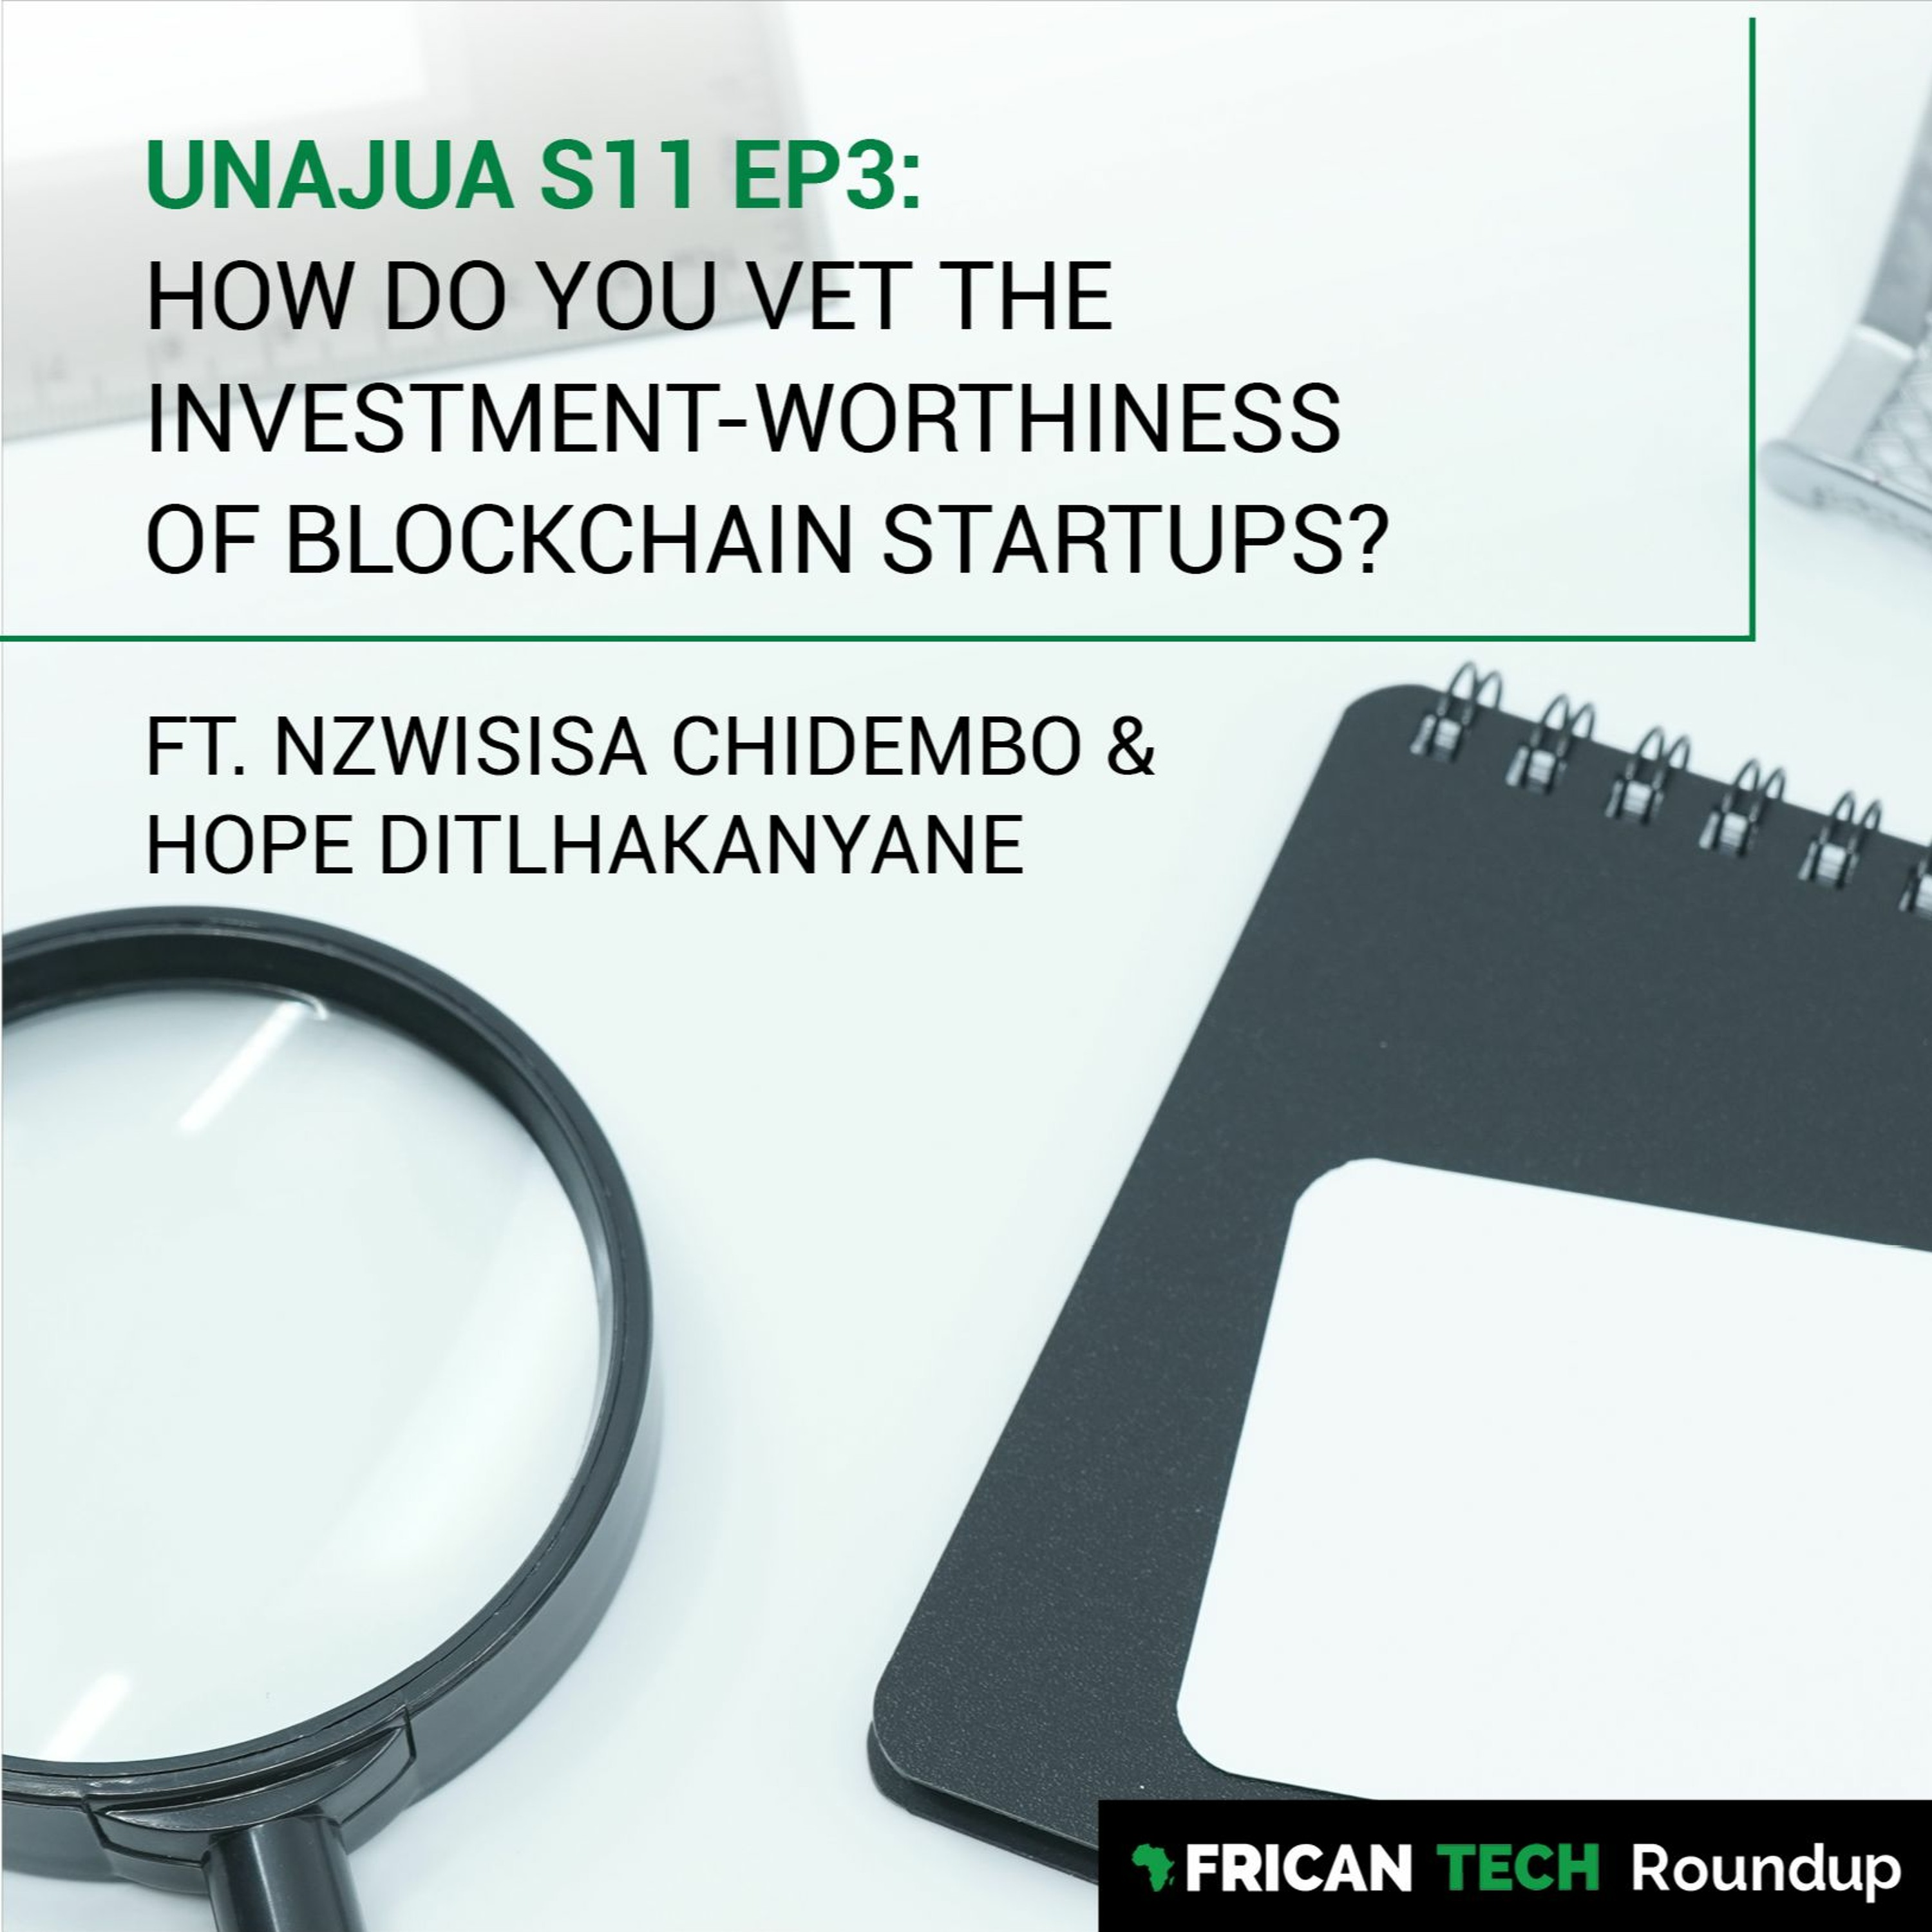 UNAJUA S11 EP3: How do you vet the investment worthiness of blockchain startups?